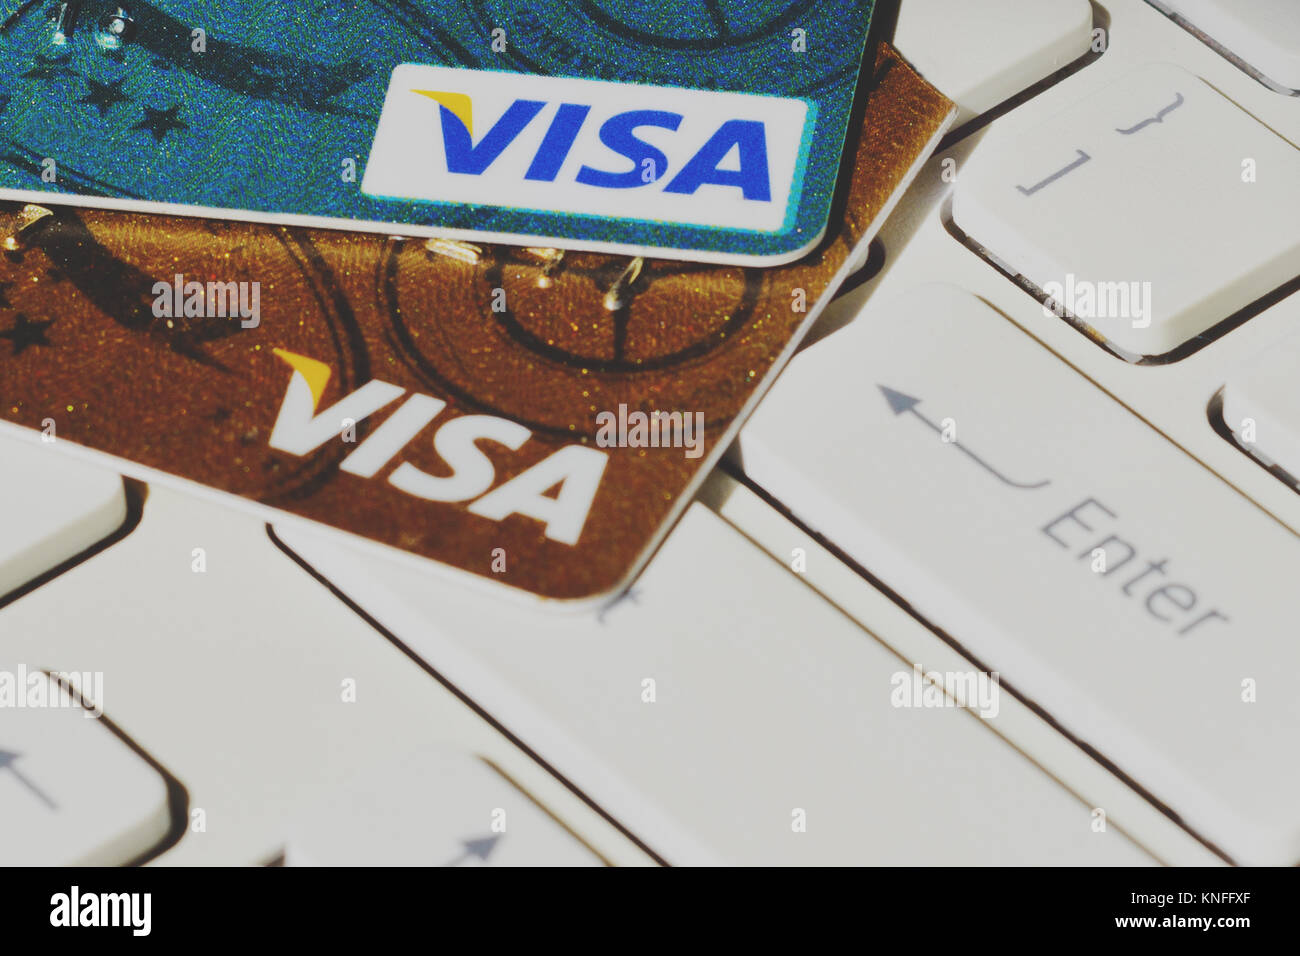 Visa payment system credit cards on computer keyboard Stock Photo